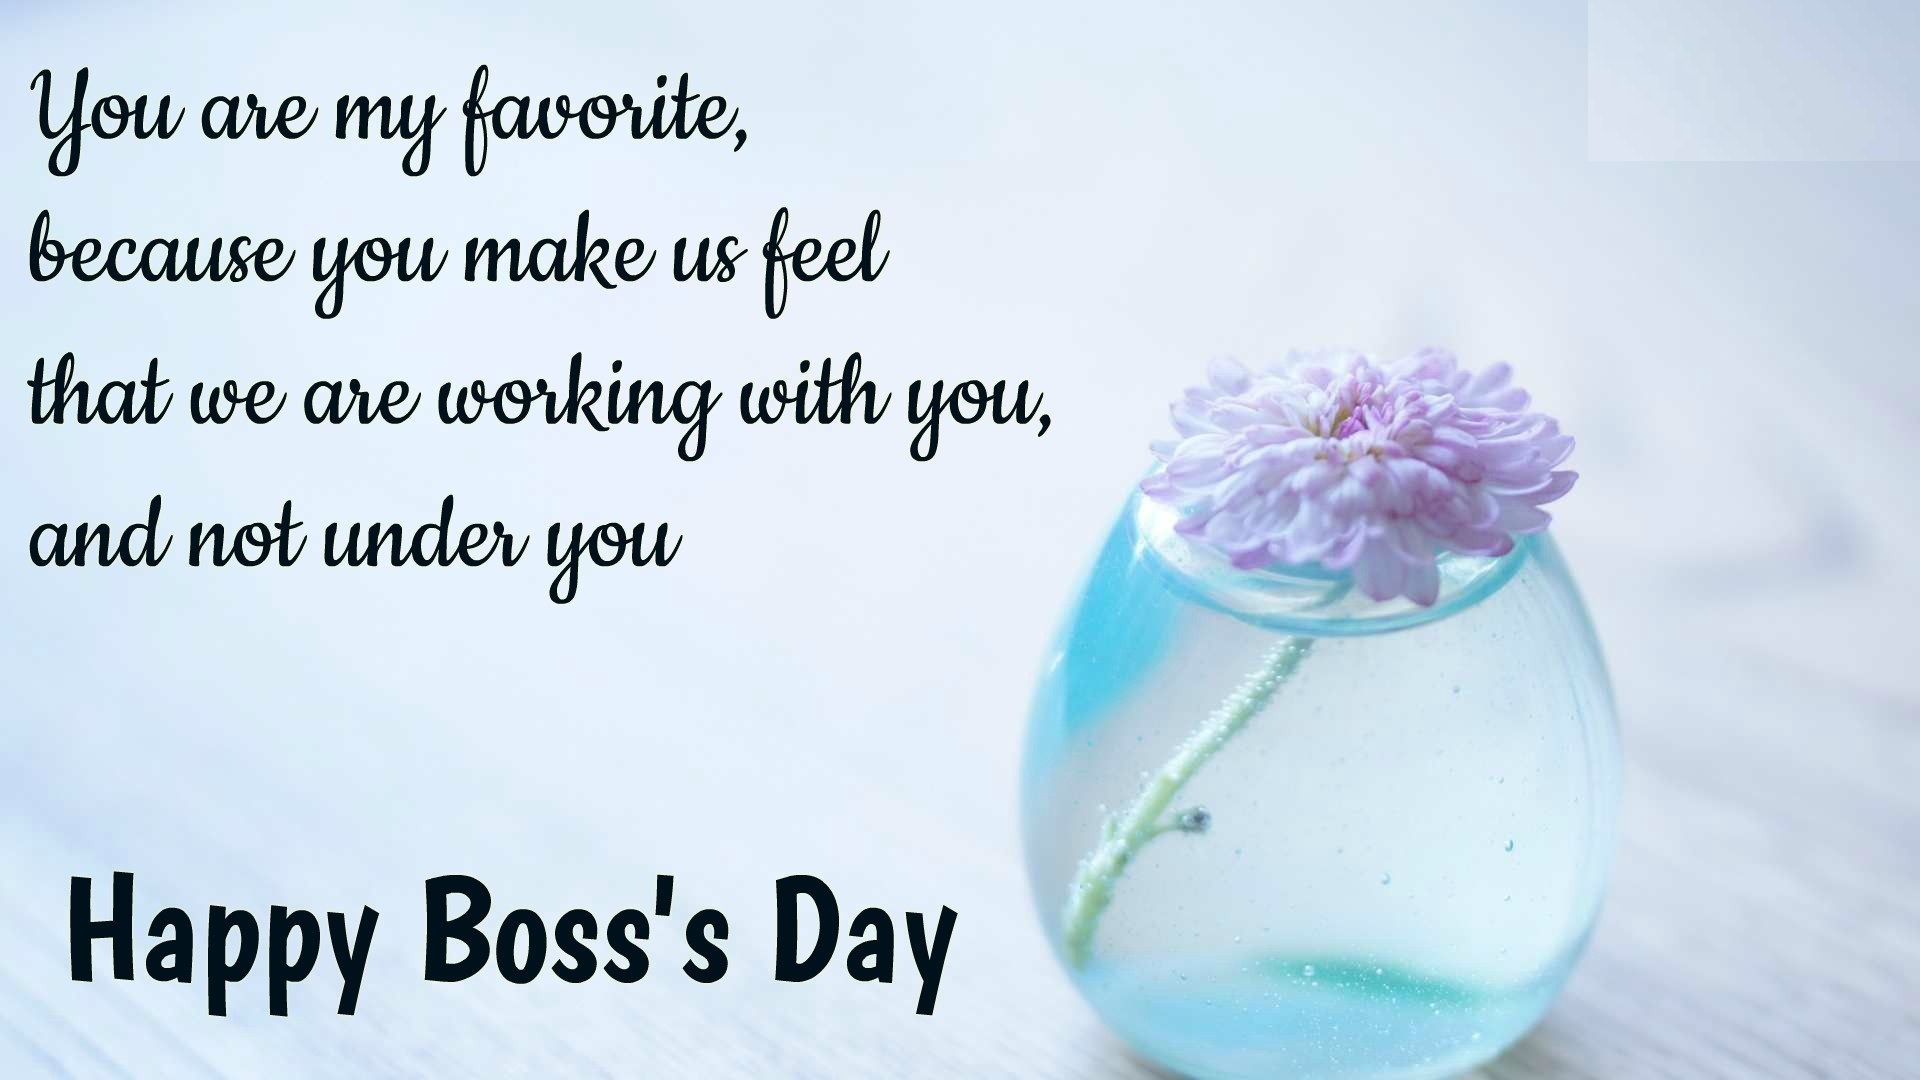 Boss Day Card With Quotes | Boss Day Images | Pinterest | Boss Day - Boss Day Cards Free Printable